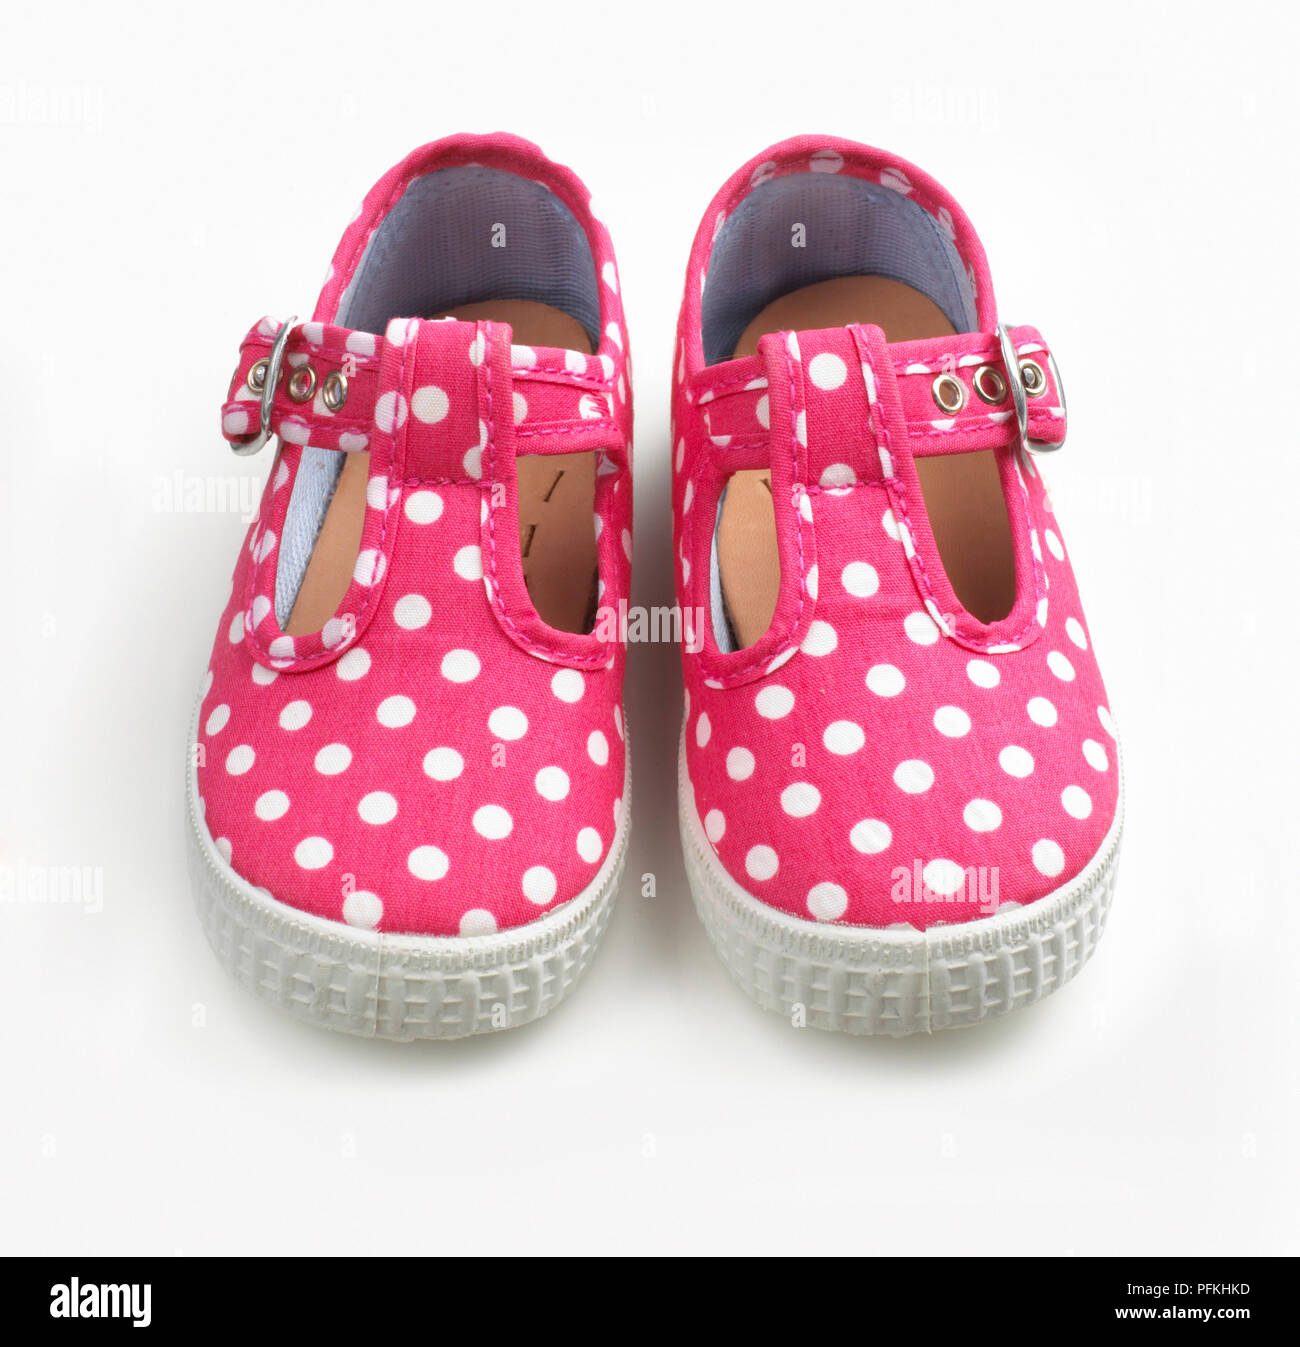 Baby shoes, pink with white spots, close-up Stock Photo - Alamy